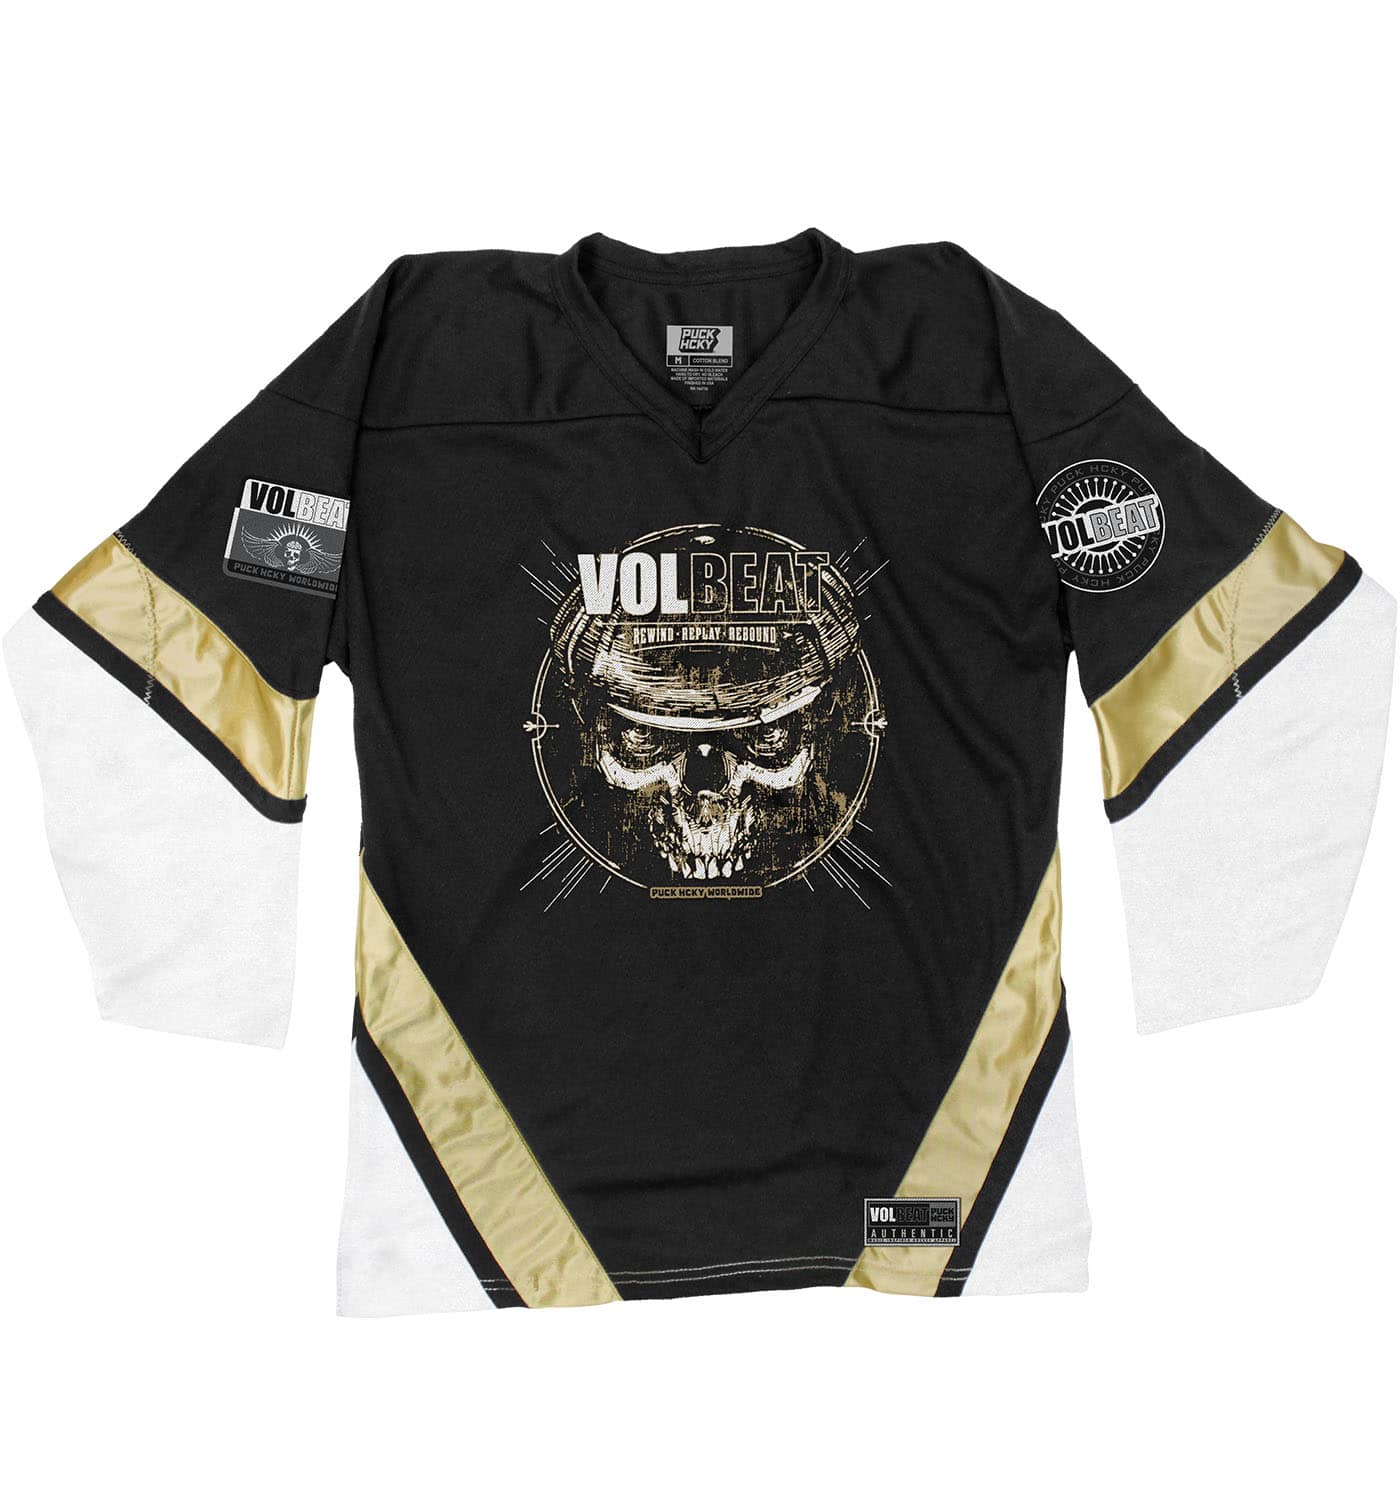 VOLBEAT ‘REWIND REPLAY REBOUND’ hockey jersey in black, white, and vegas gold front view